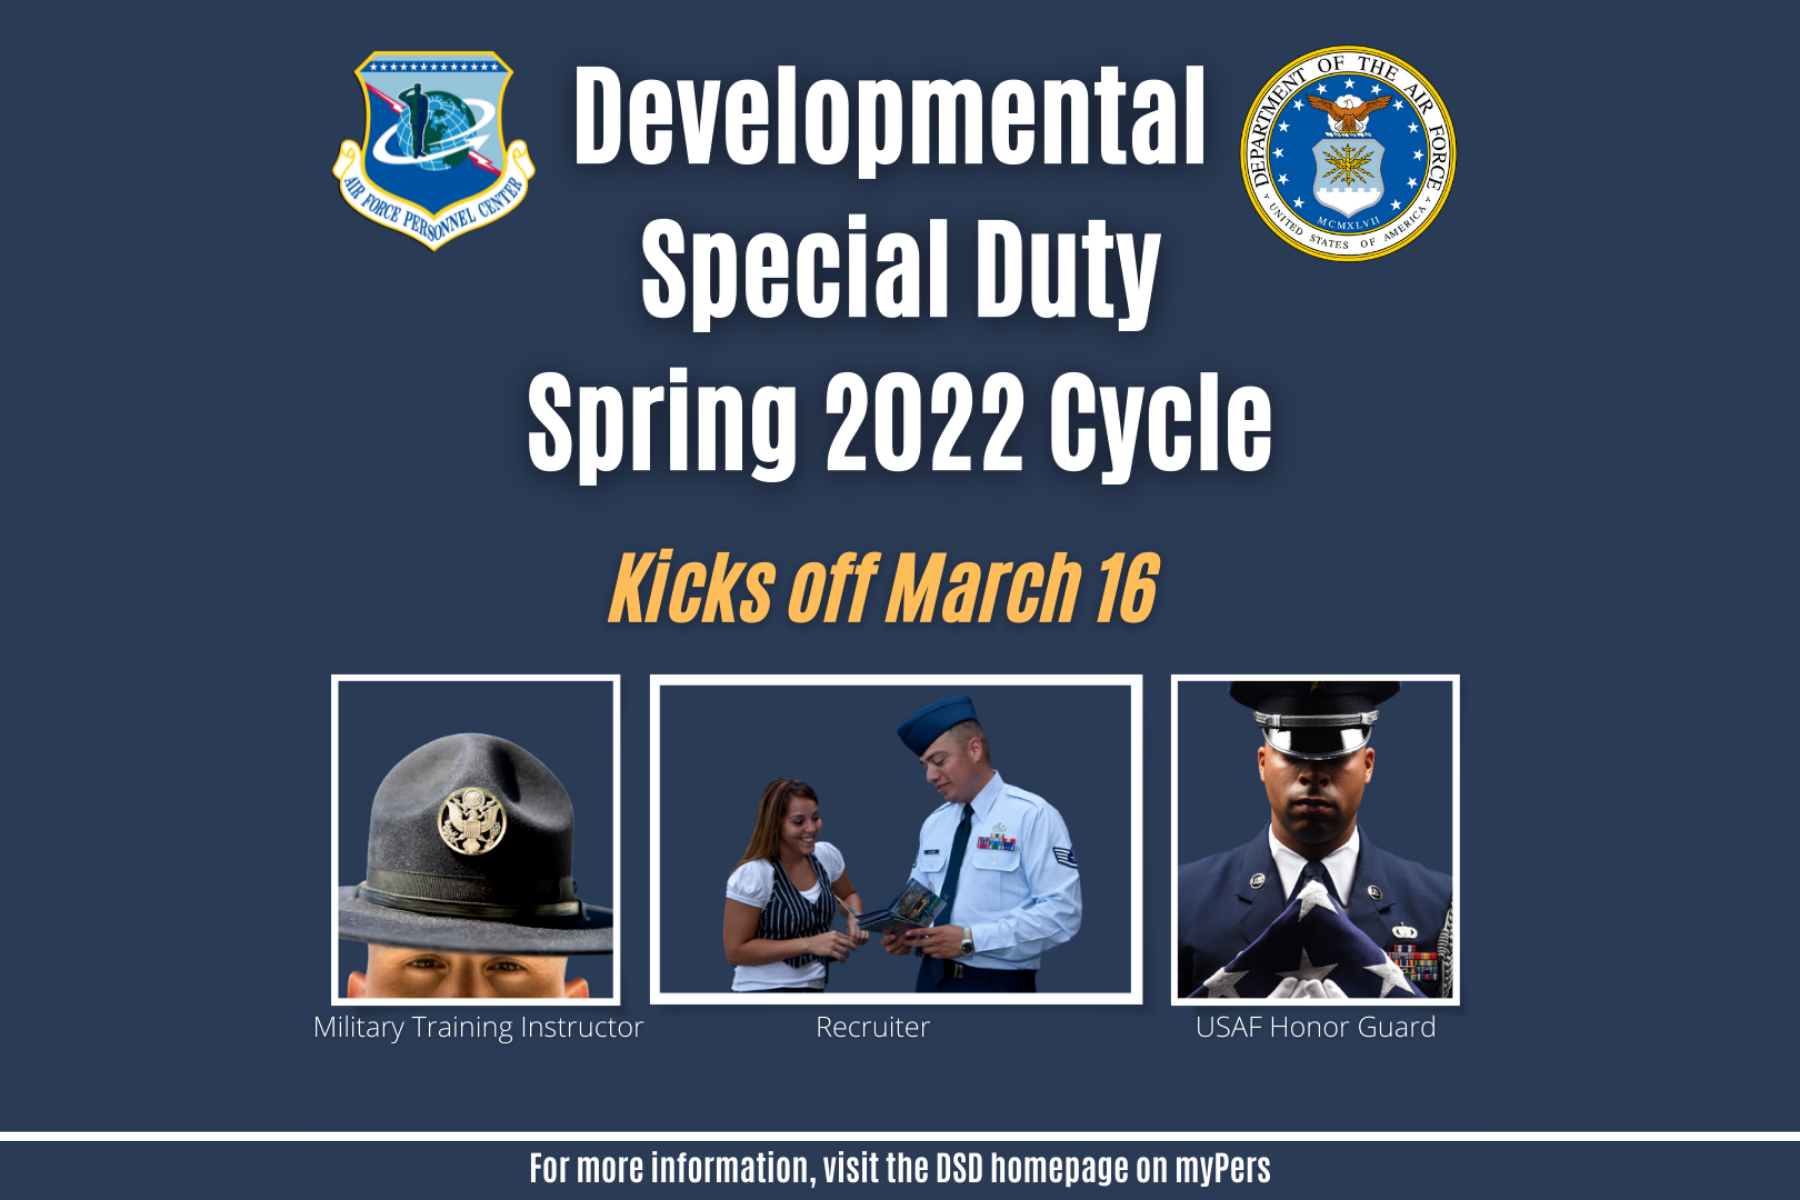 Twopart DSD Spring cycle kicks off March 16 > Air Force's Personnel